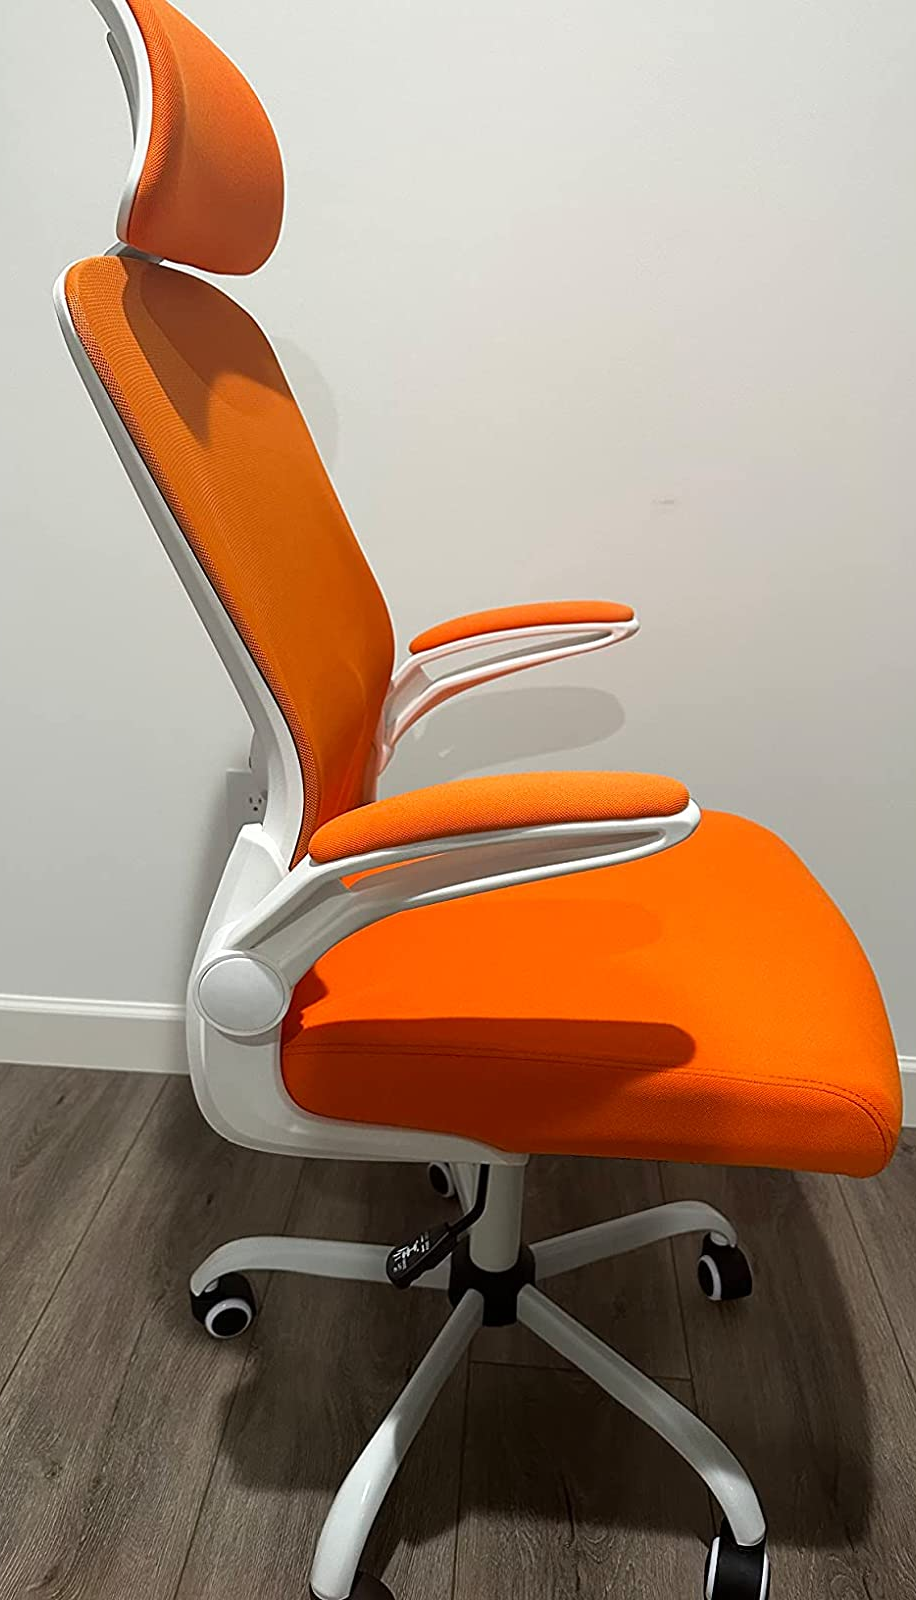 DIY Modern Counter Height Chairs — the Awesome Orange